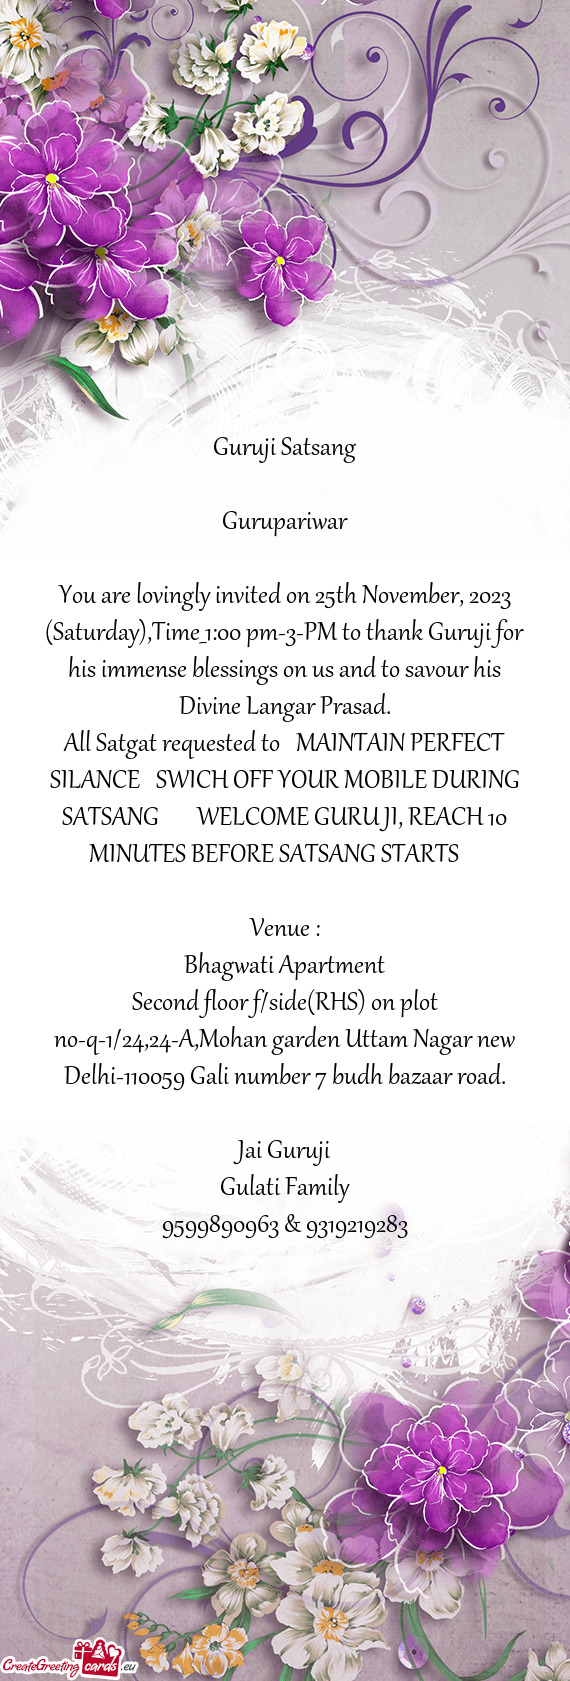 You are lovingly invited on 25th November, 2023 (Saturday),Time_1:00 pm-3-PM to thank Guruji for his